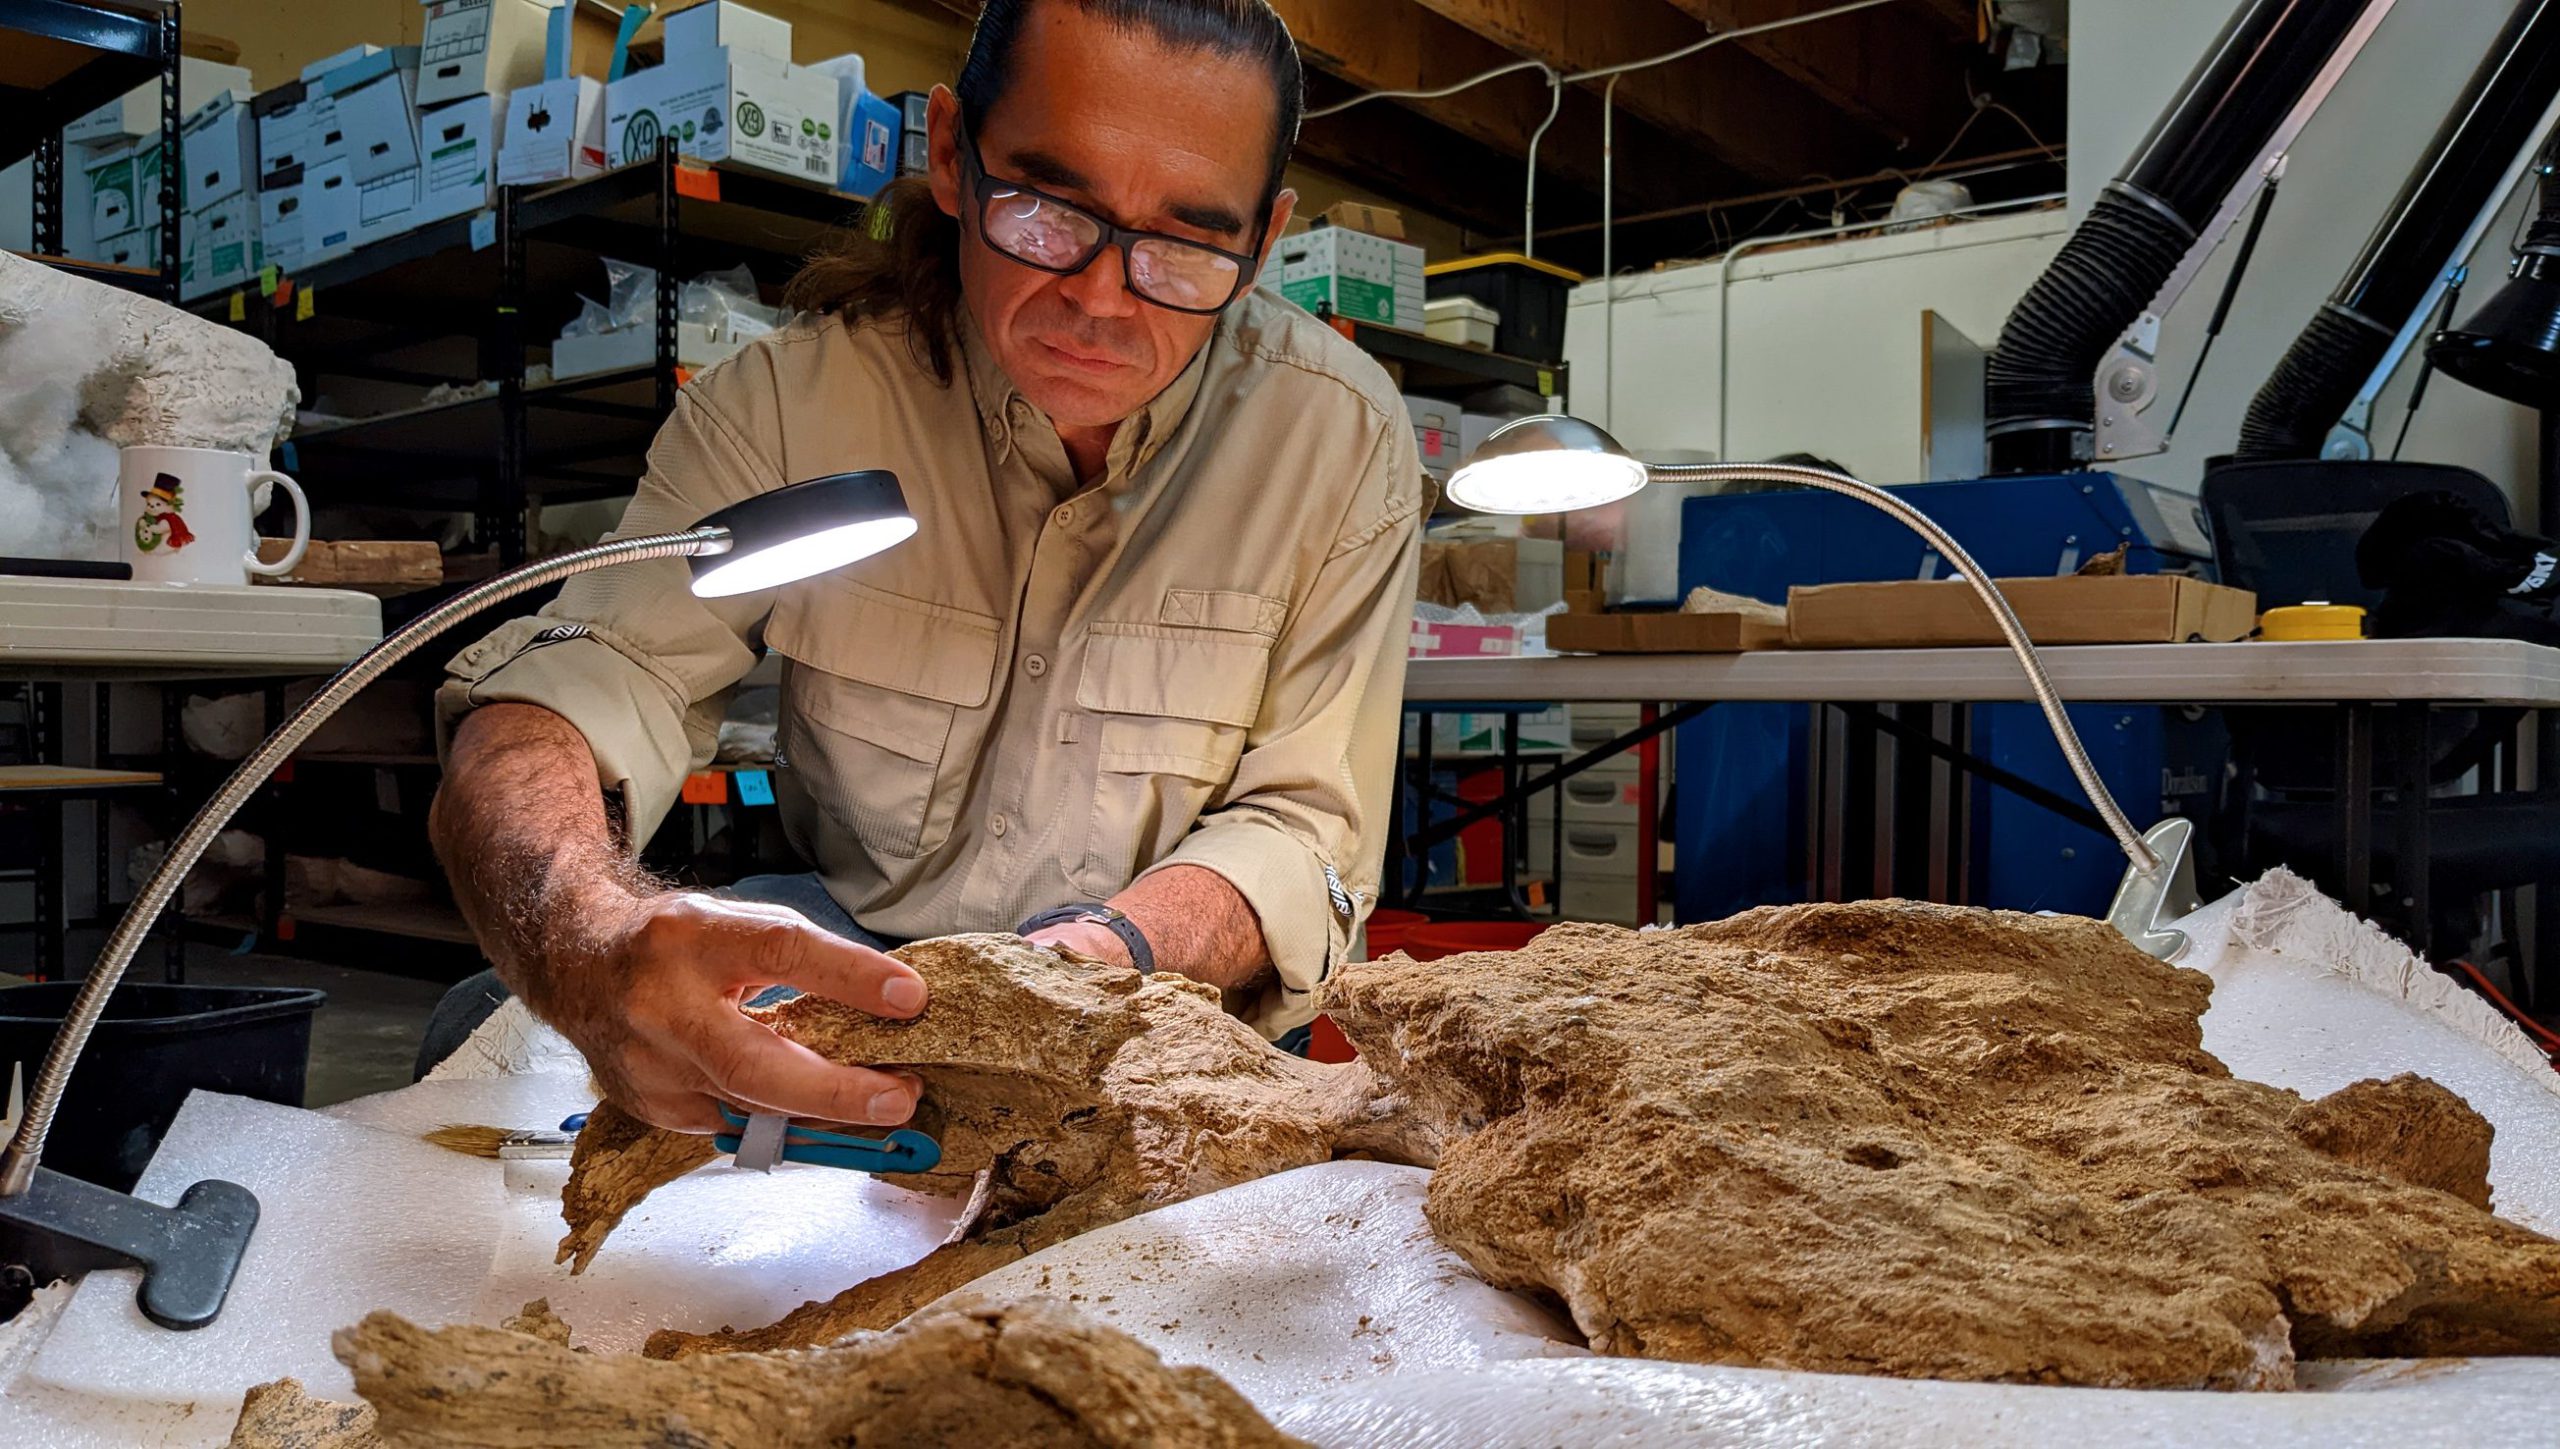 A Cogstone archaeologist repairing excavated sloth remains.